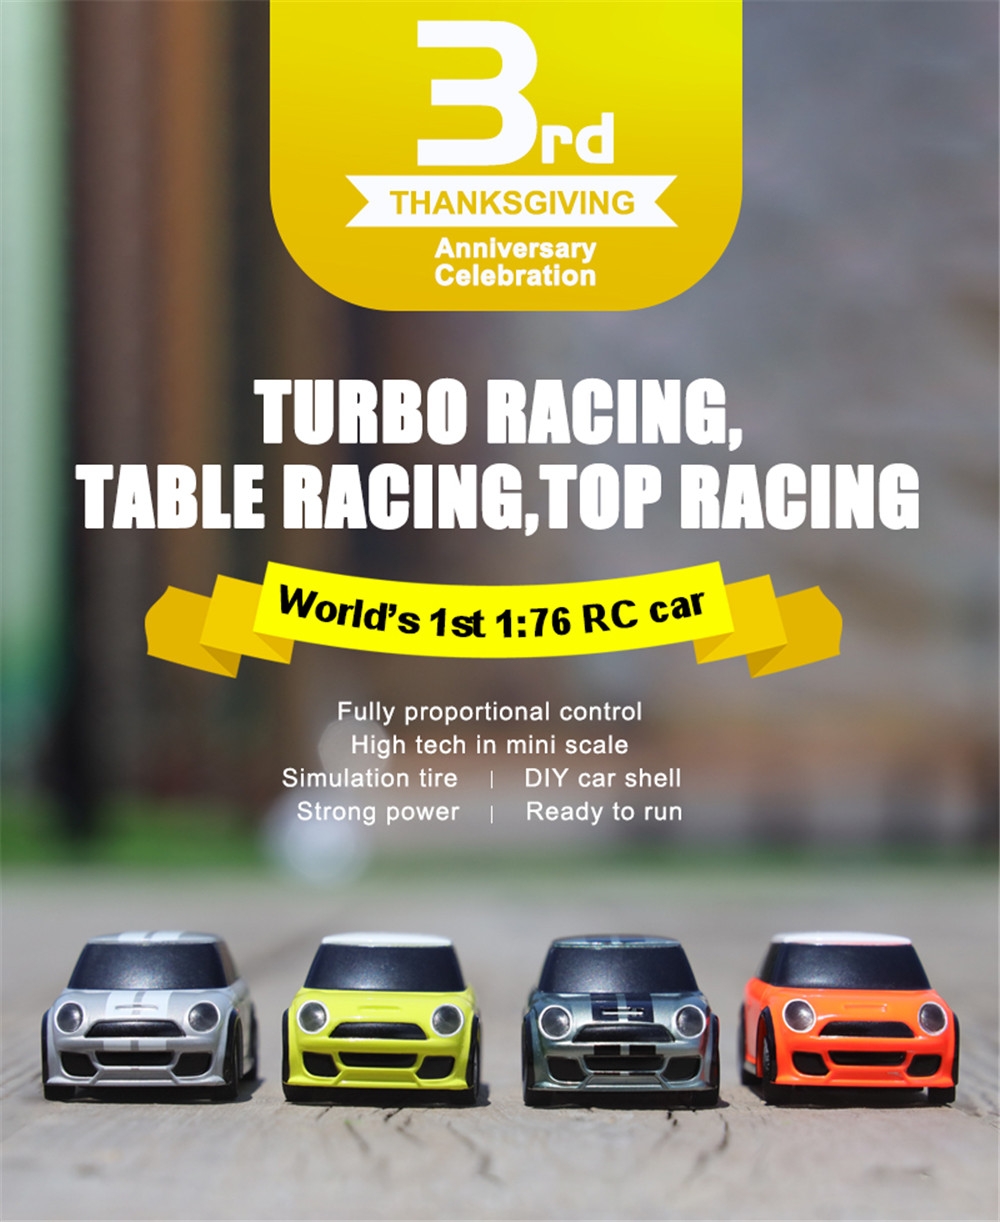 $60.02 for Turbo RTR 1/76 Two RC Cars 3rd Anniversary Version